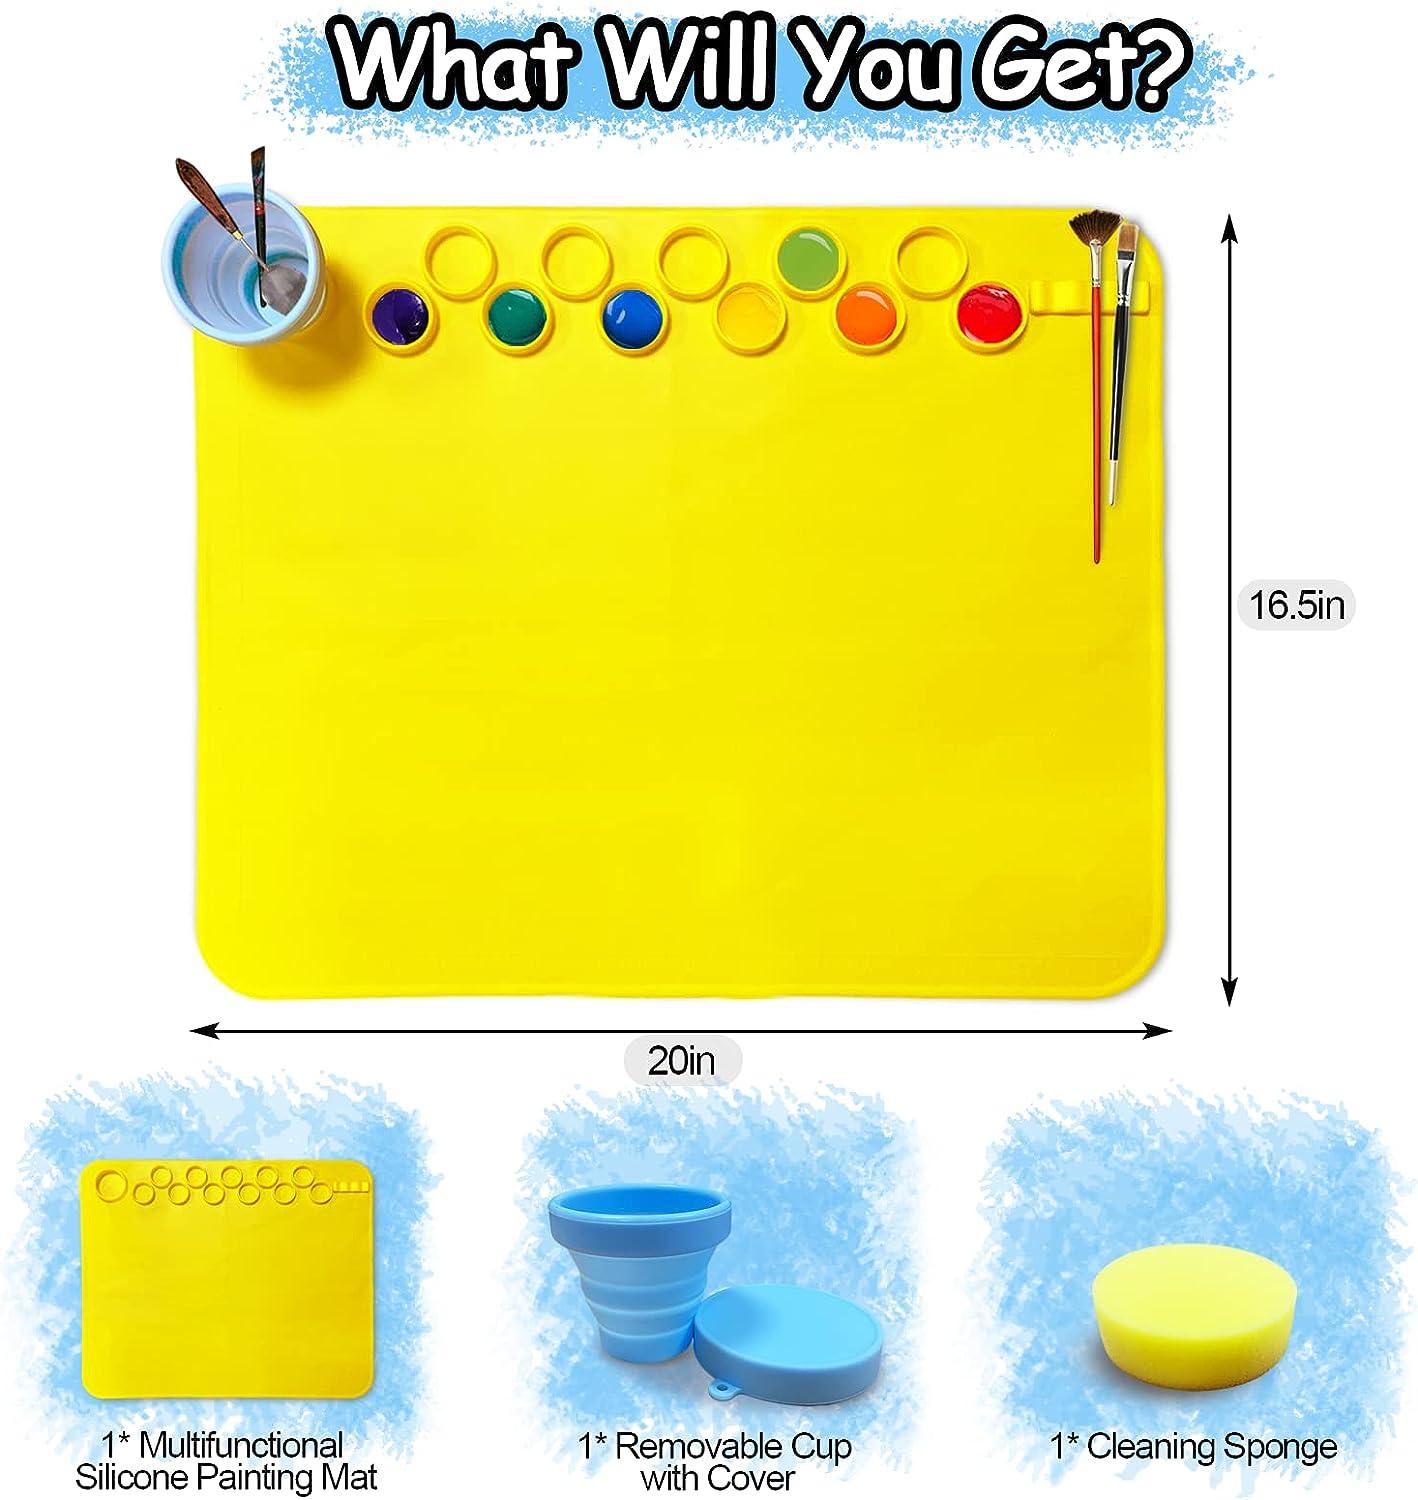 Silicone Painting Mat, BONWORL Silicone Craft Mat with Cleaning Water Cup  and 11 Paint Holder, 20''16.5'' Silicone Art Mat for Resin Casting, Painting,  DIY, Clay and Play Doh (Yellow)